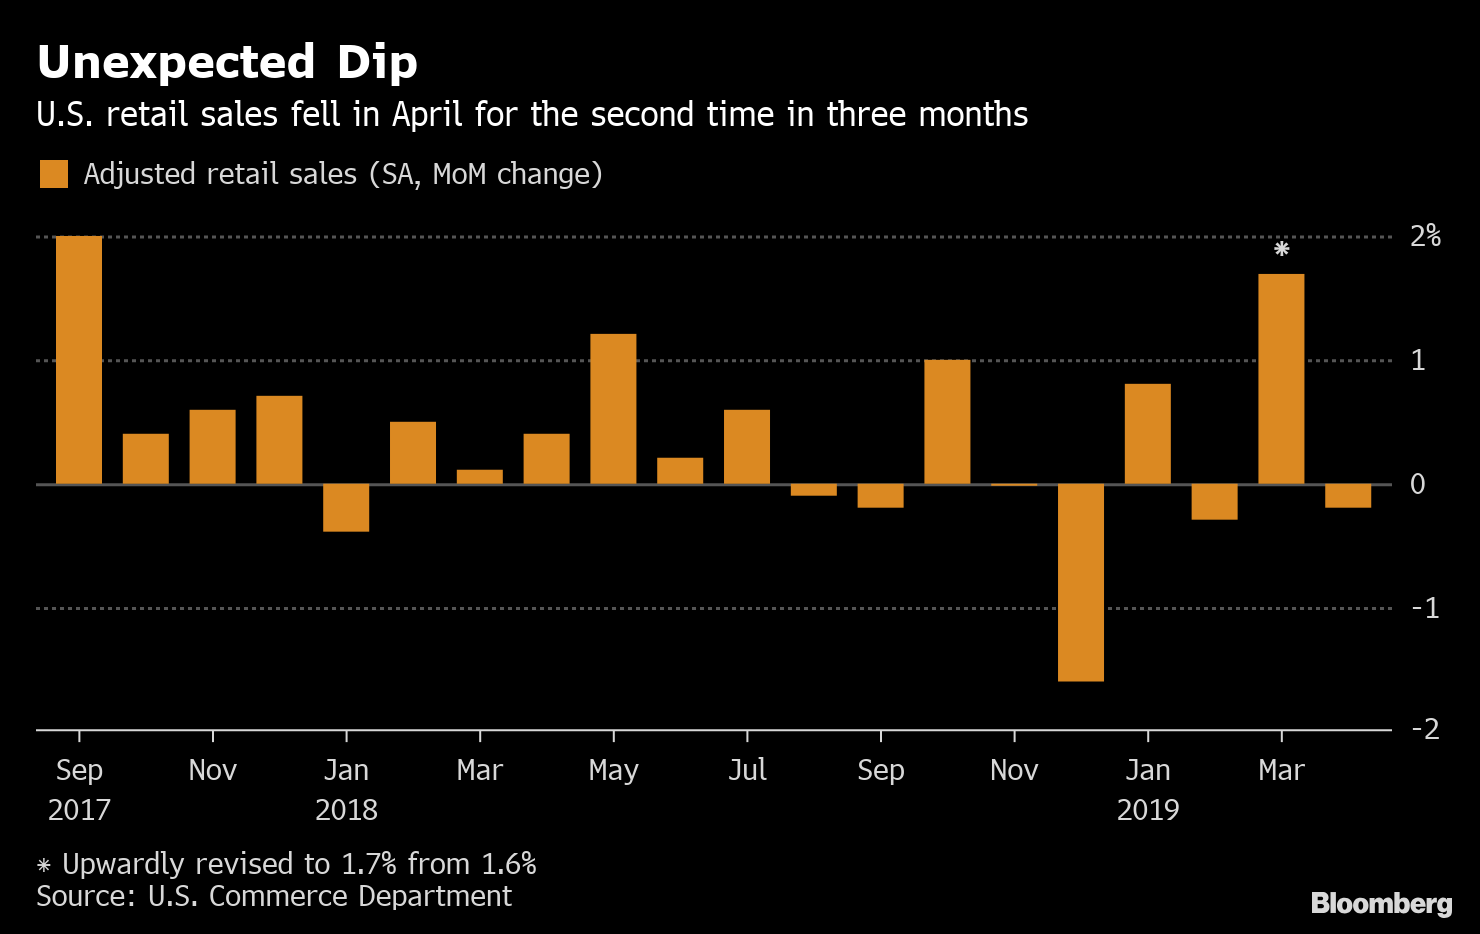 Retail sales in the U.S. unexpectedly declined in April | LaptrinhX / News